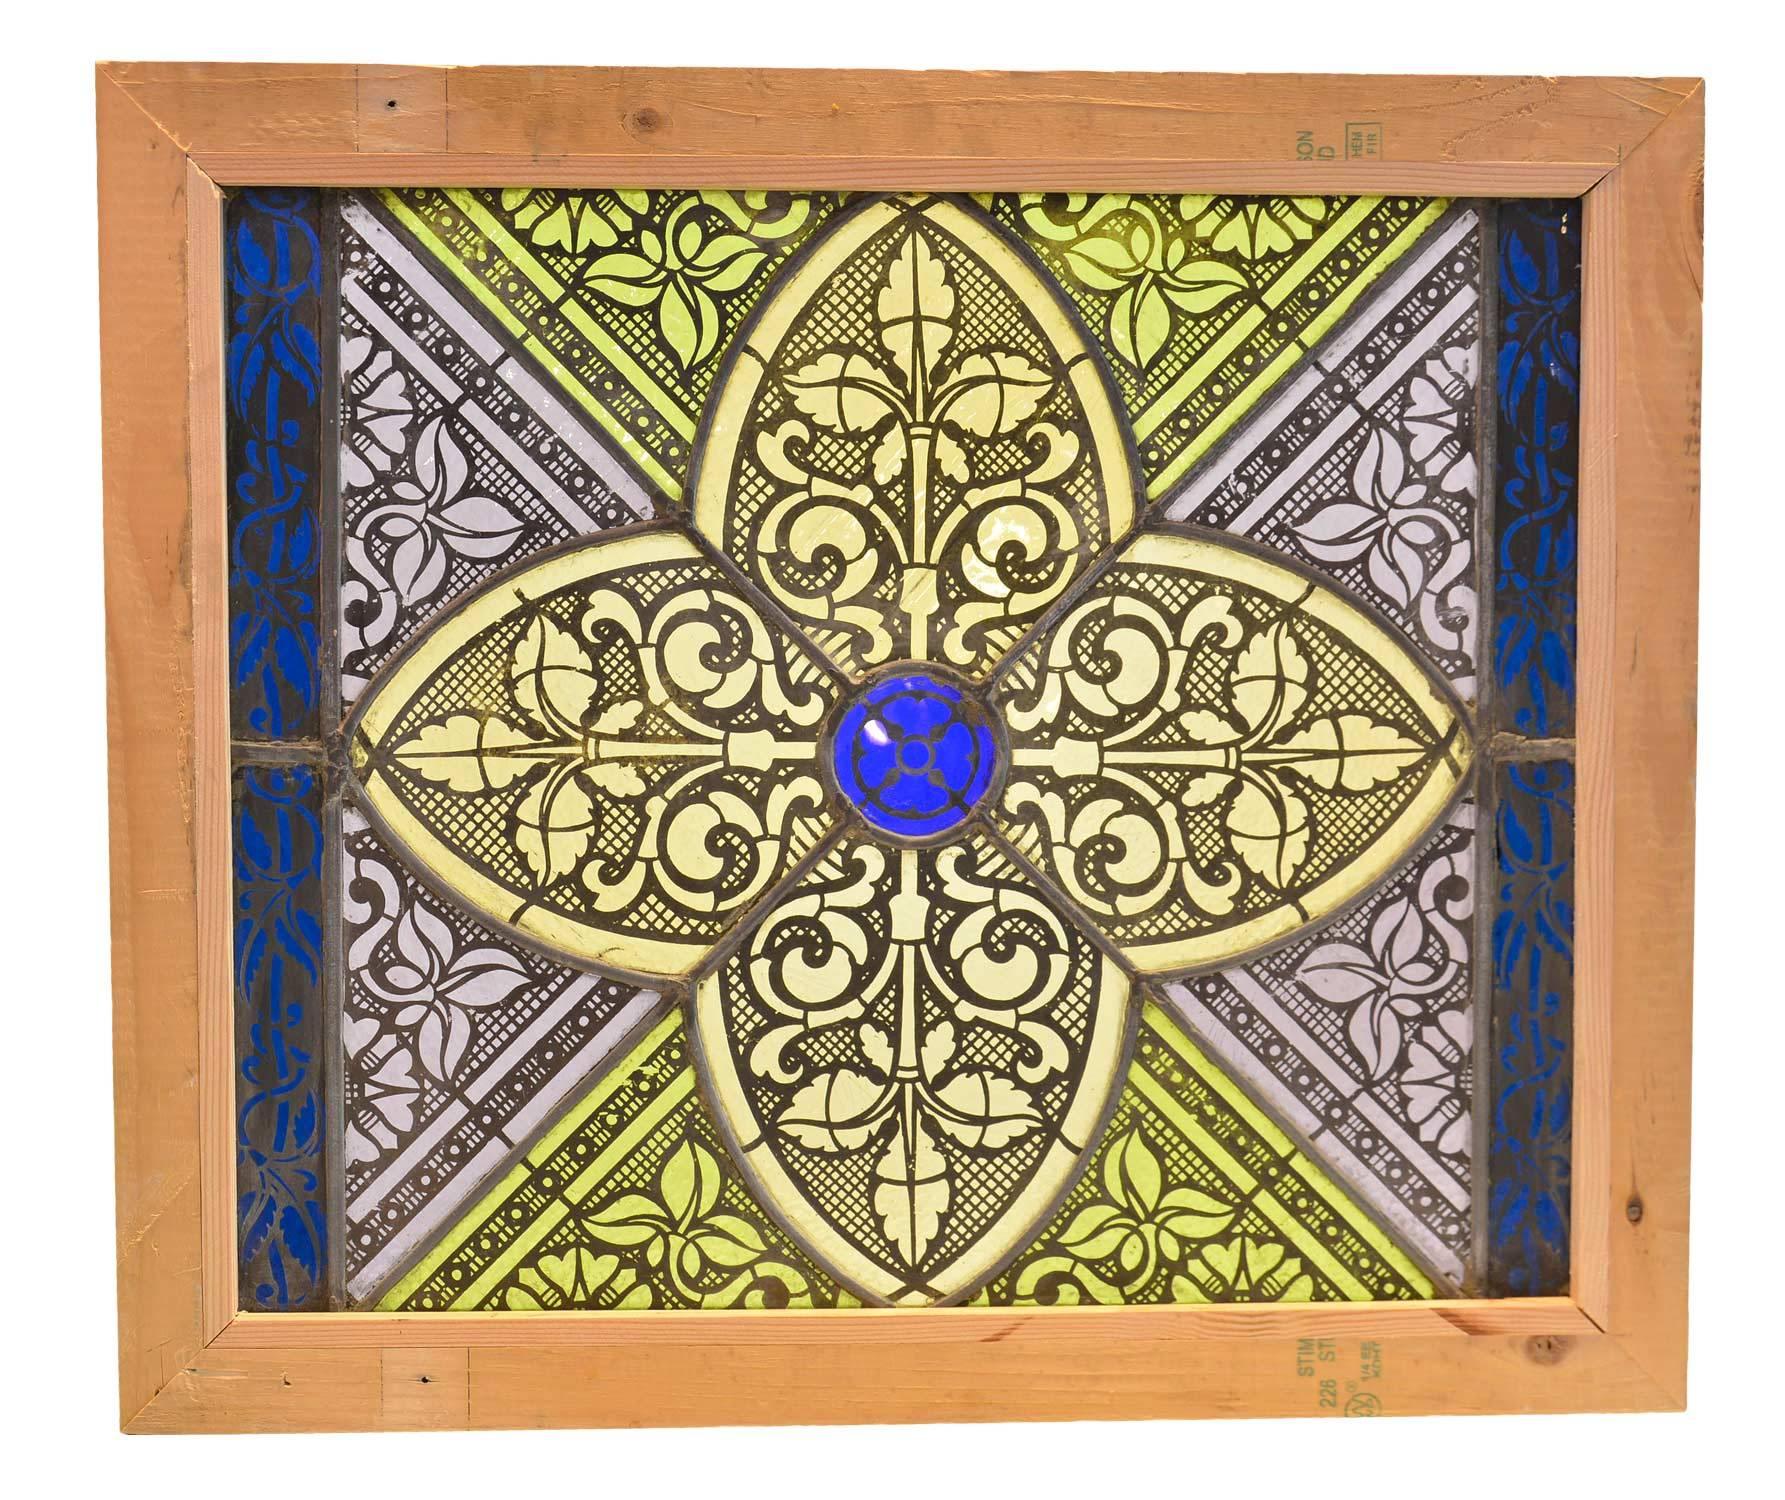 These beautiful flashed glass windows feature stylized quatrefoil in yellow, green and purple, with Gothic floral details throughout. We still have one available: the borderless window as seen in the photos.

With border: 23.5" tall x